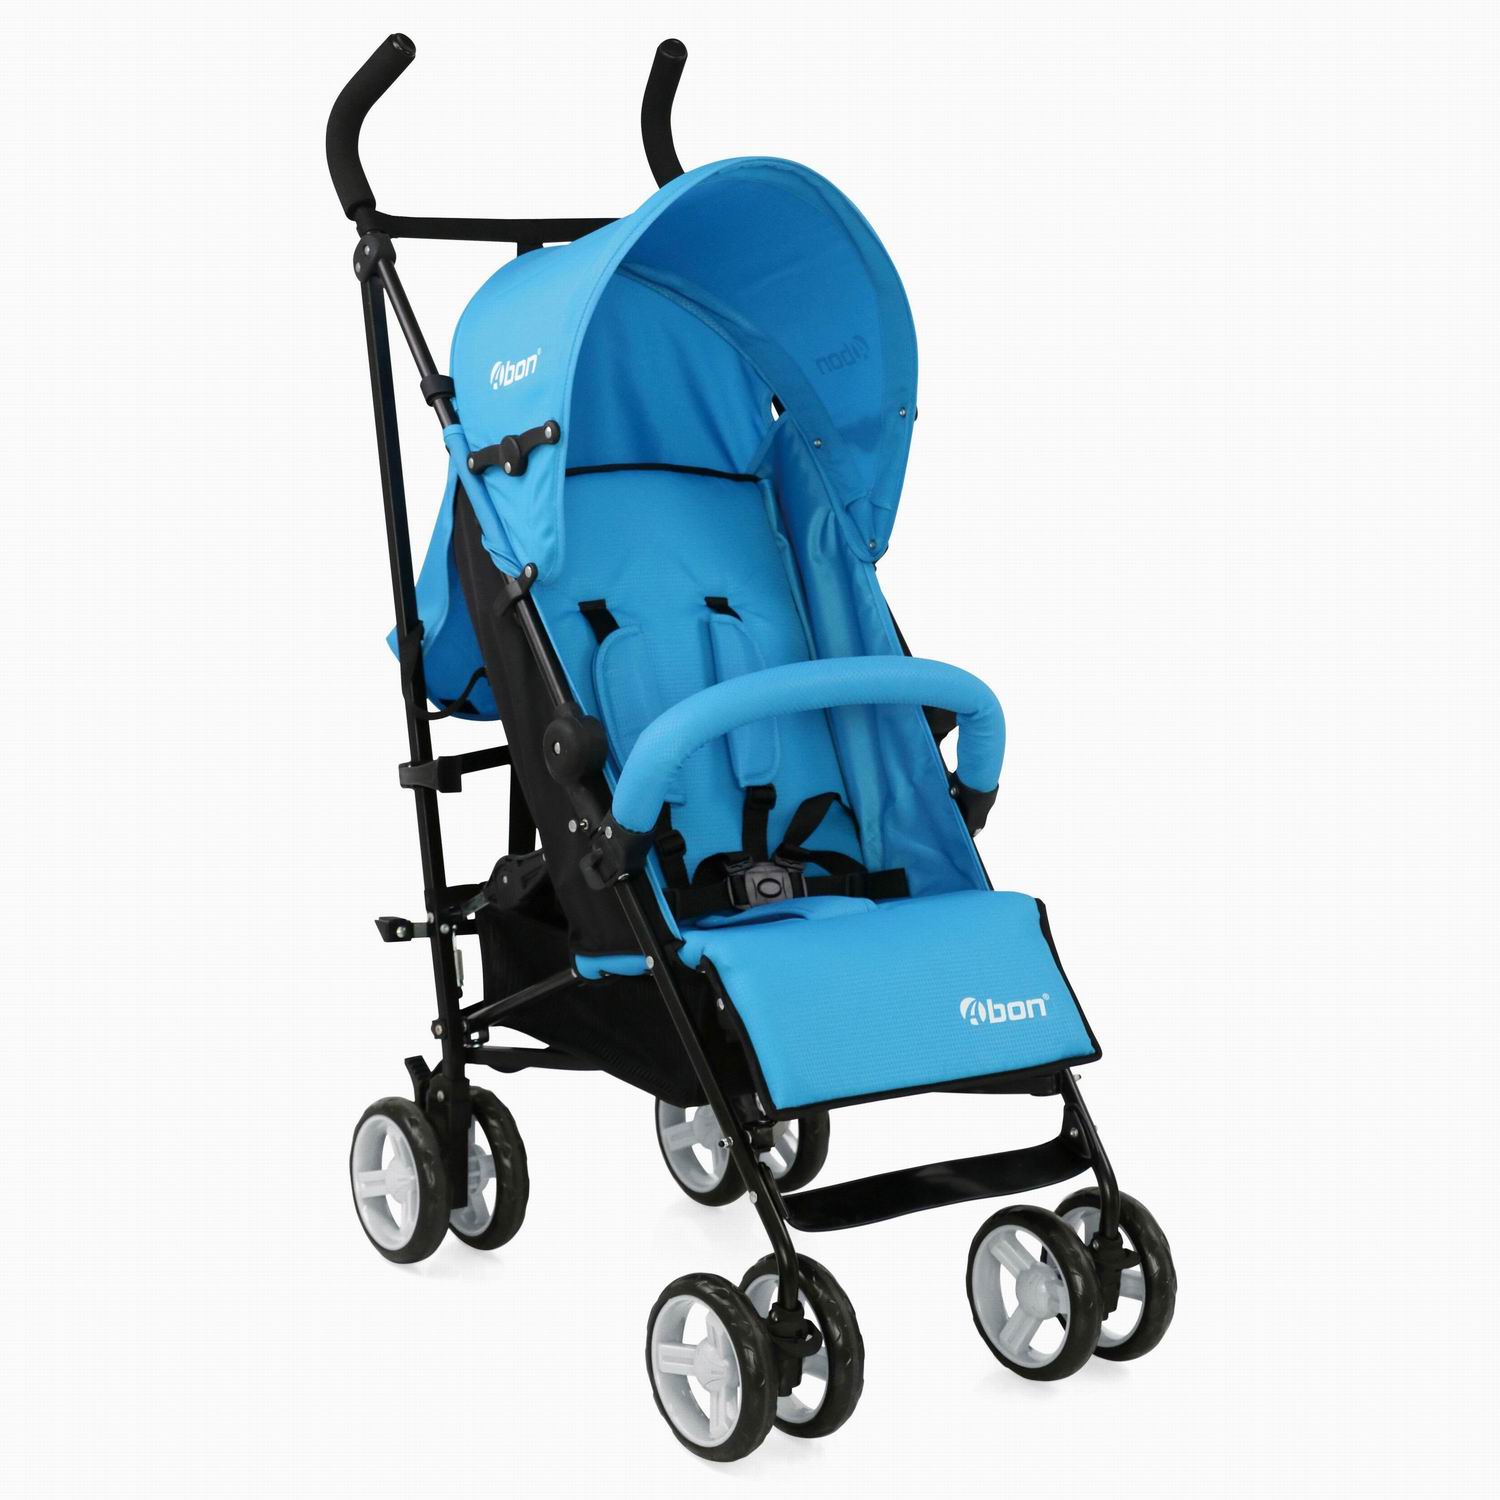 Fully Recline Buggy